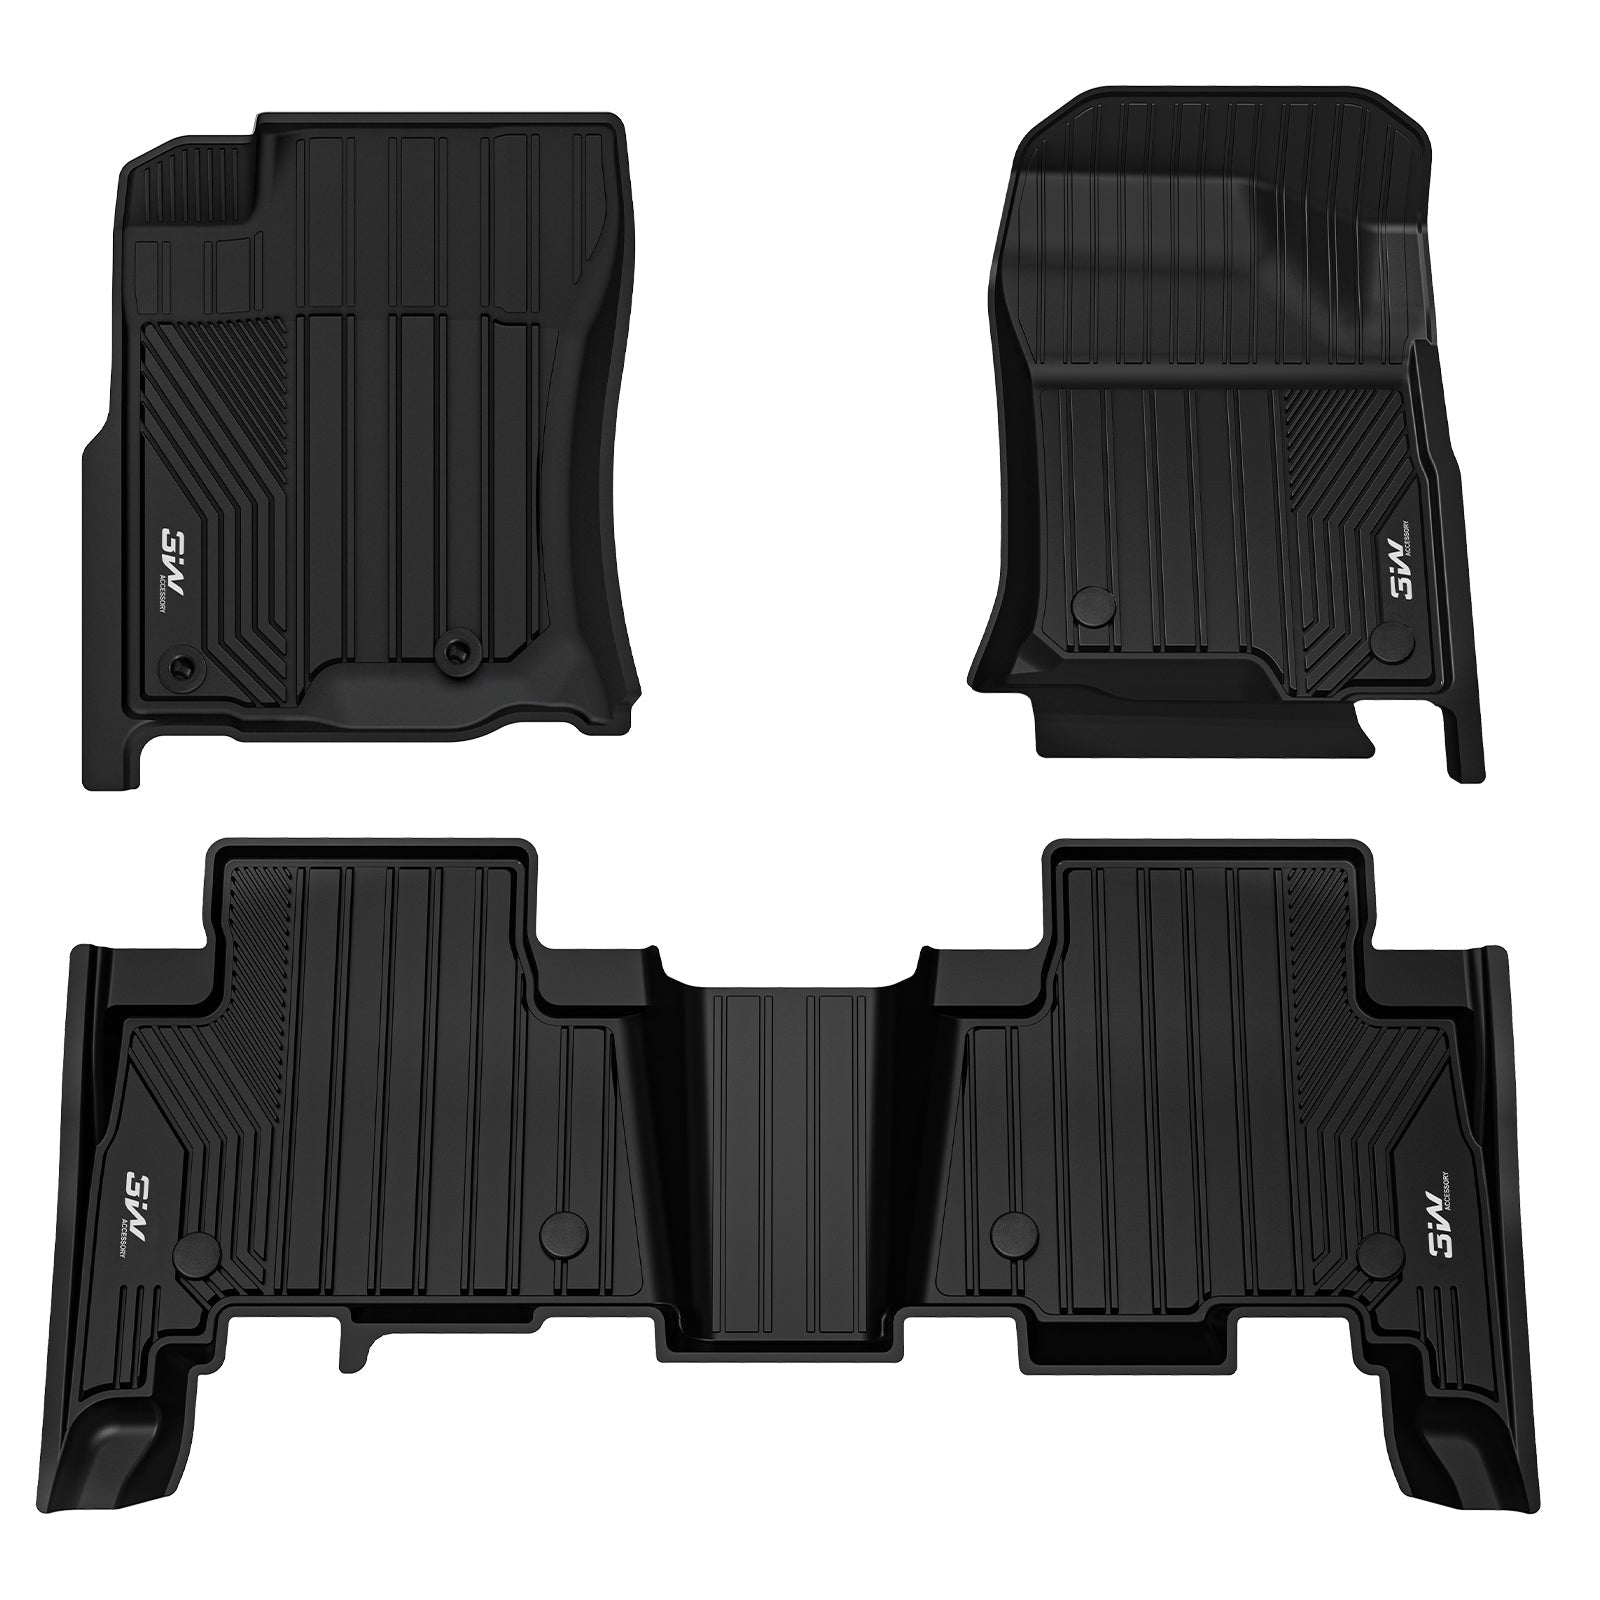 3W LEXUS GX460 2014-2023 (Only for 5 Seats) Custom Floor Mats TPE Material & All-Weather Protection Vehicles & Parts 3w 2014-2023 GX460 2014-2023 1st&2nd Row Mats